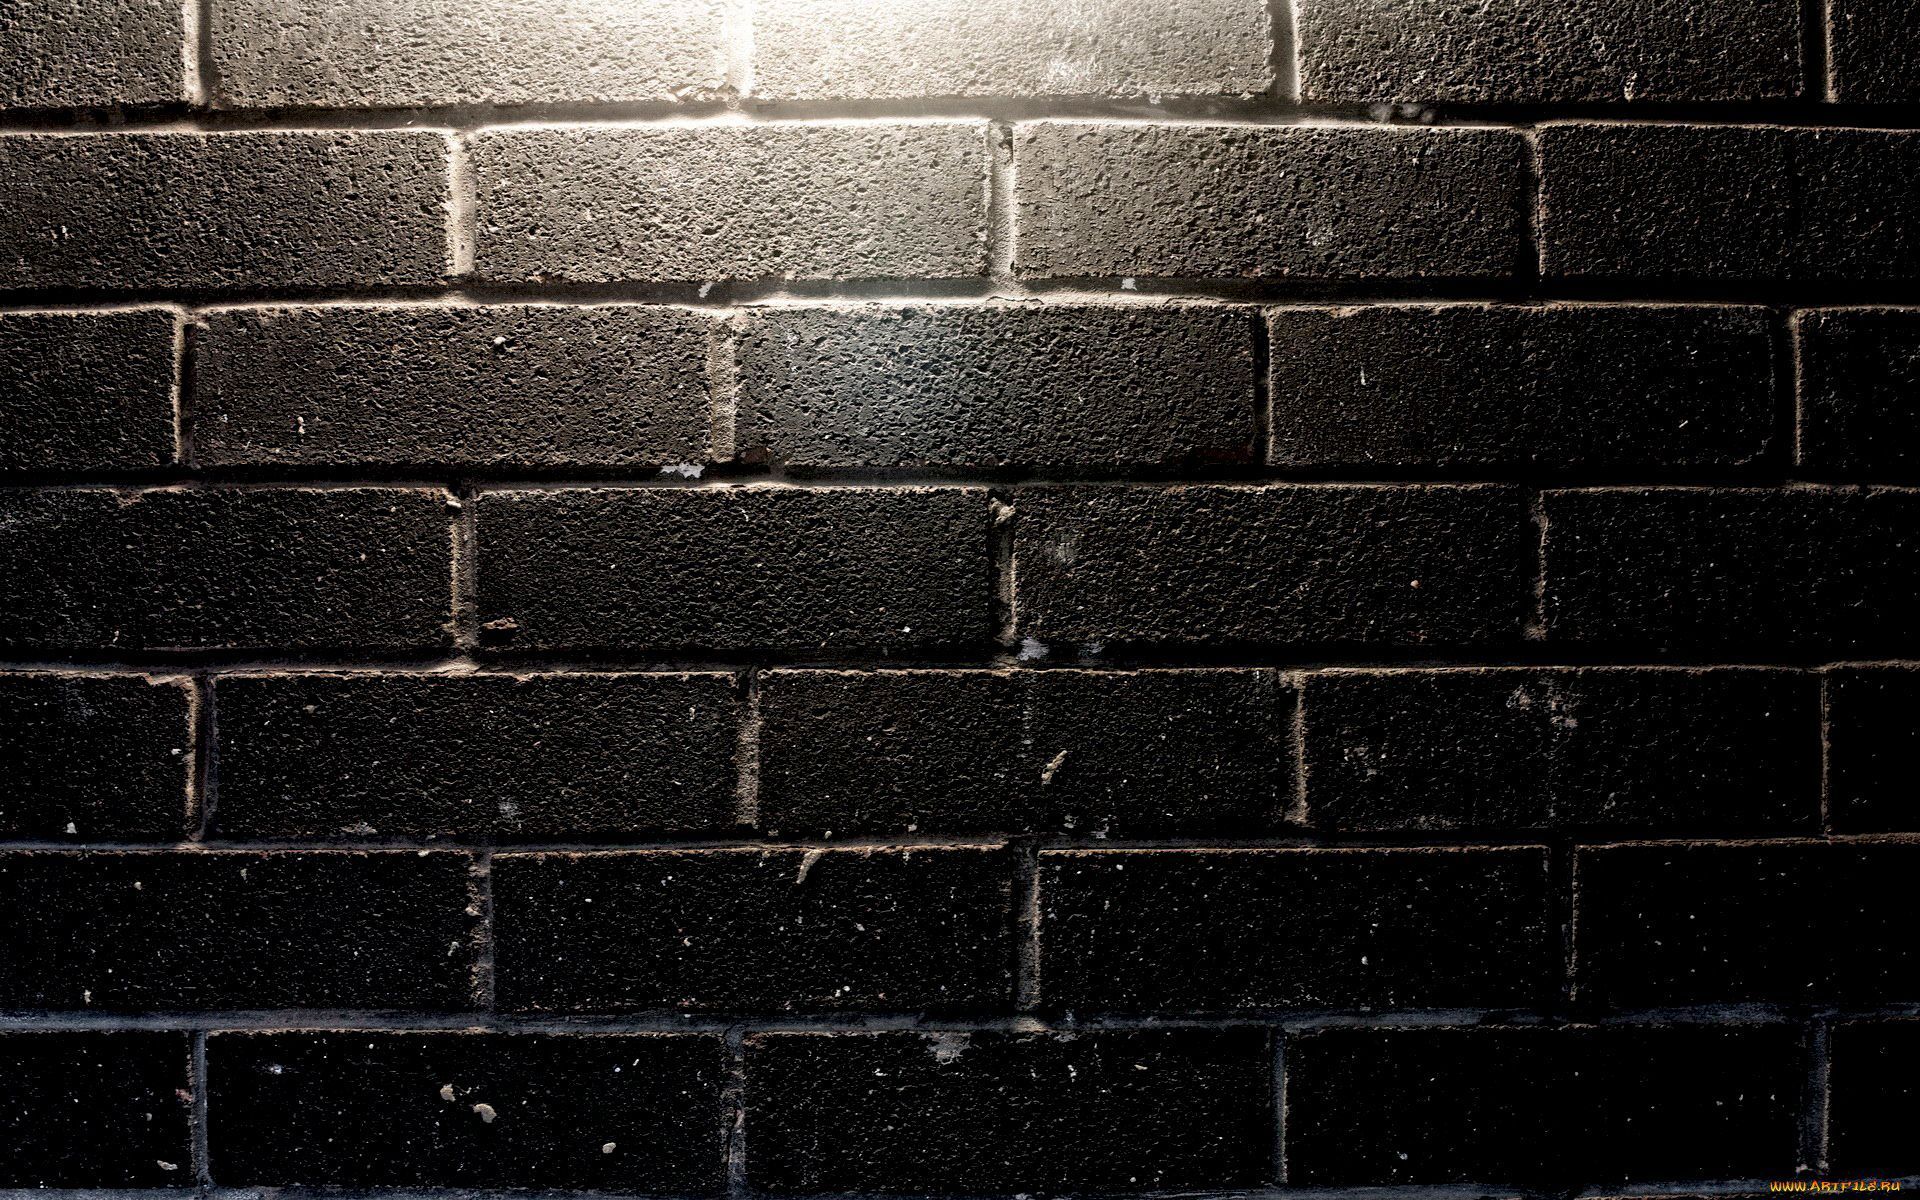 Brick Background Images 6878 - HD Wallpapers Site